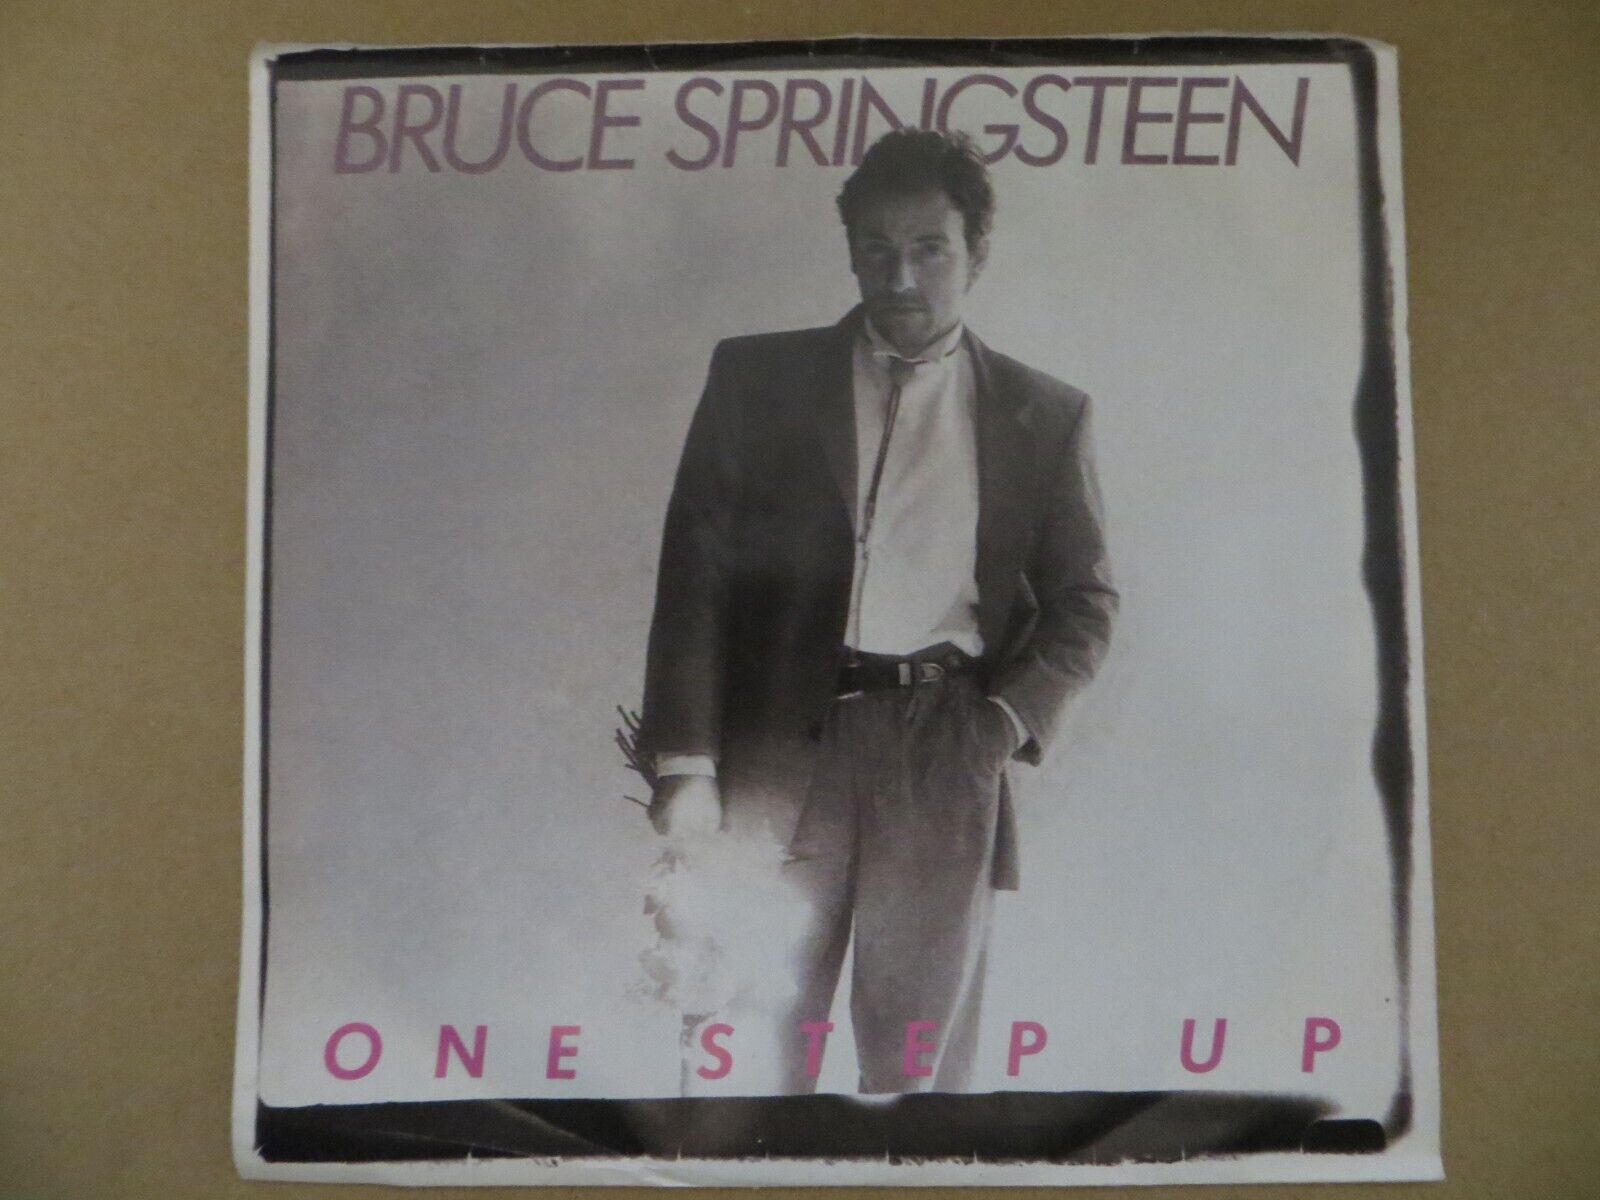 Bruce Springsteen – One Step Up / Roulette - 1988 - Columbia 38-07726 7